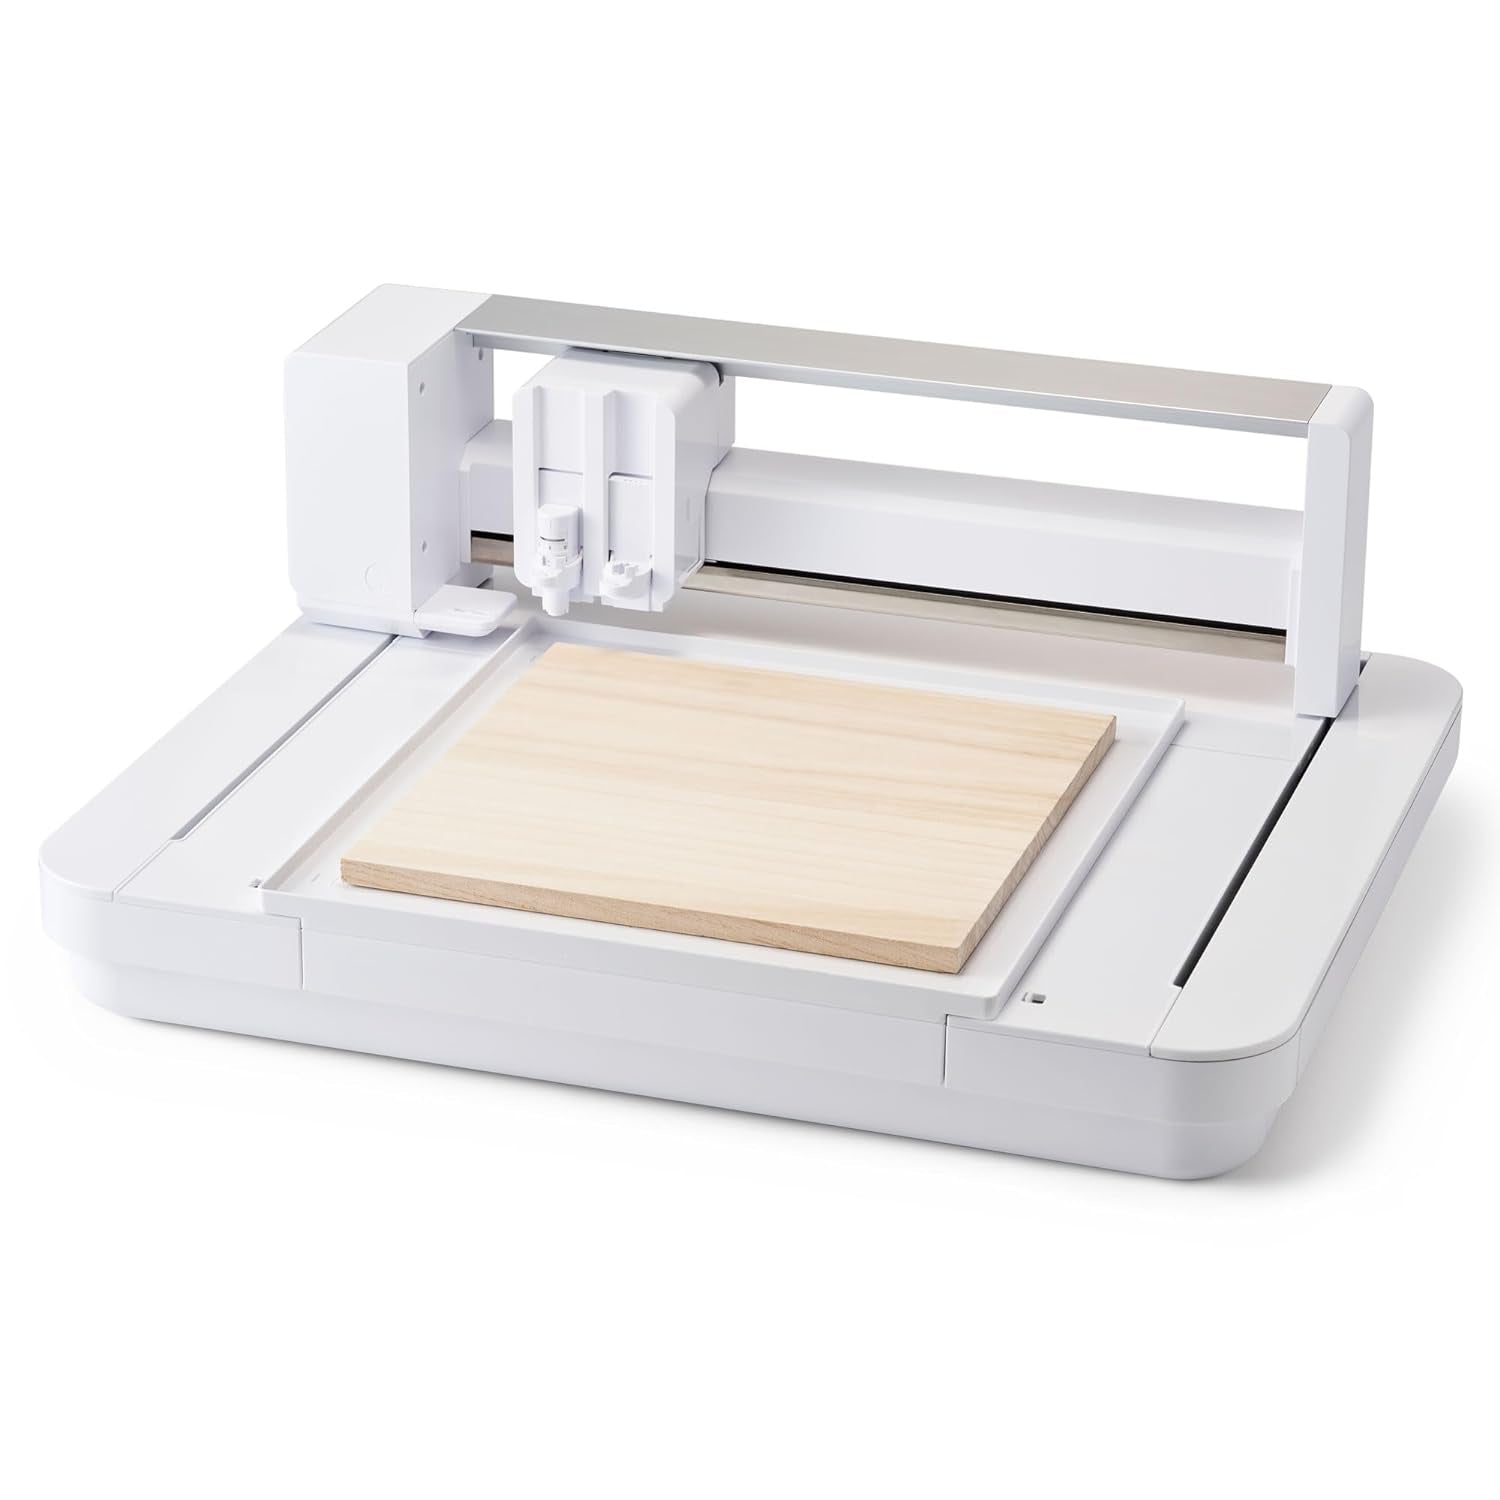 Silhouette Curio 2 12 Inch Wide Format Flatbed Cutter with Electrostatic Bed, 20 Mm Material Height, Electric Tool Compatible, and Silhouette Studio